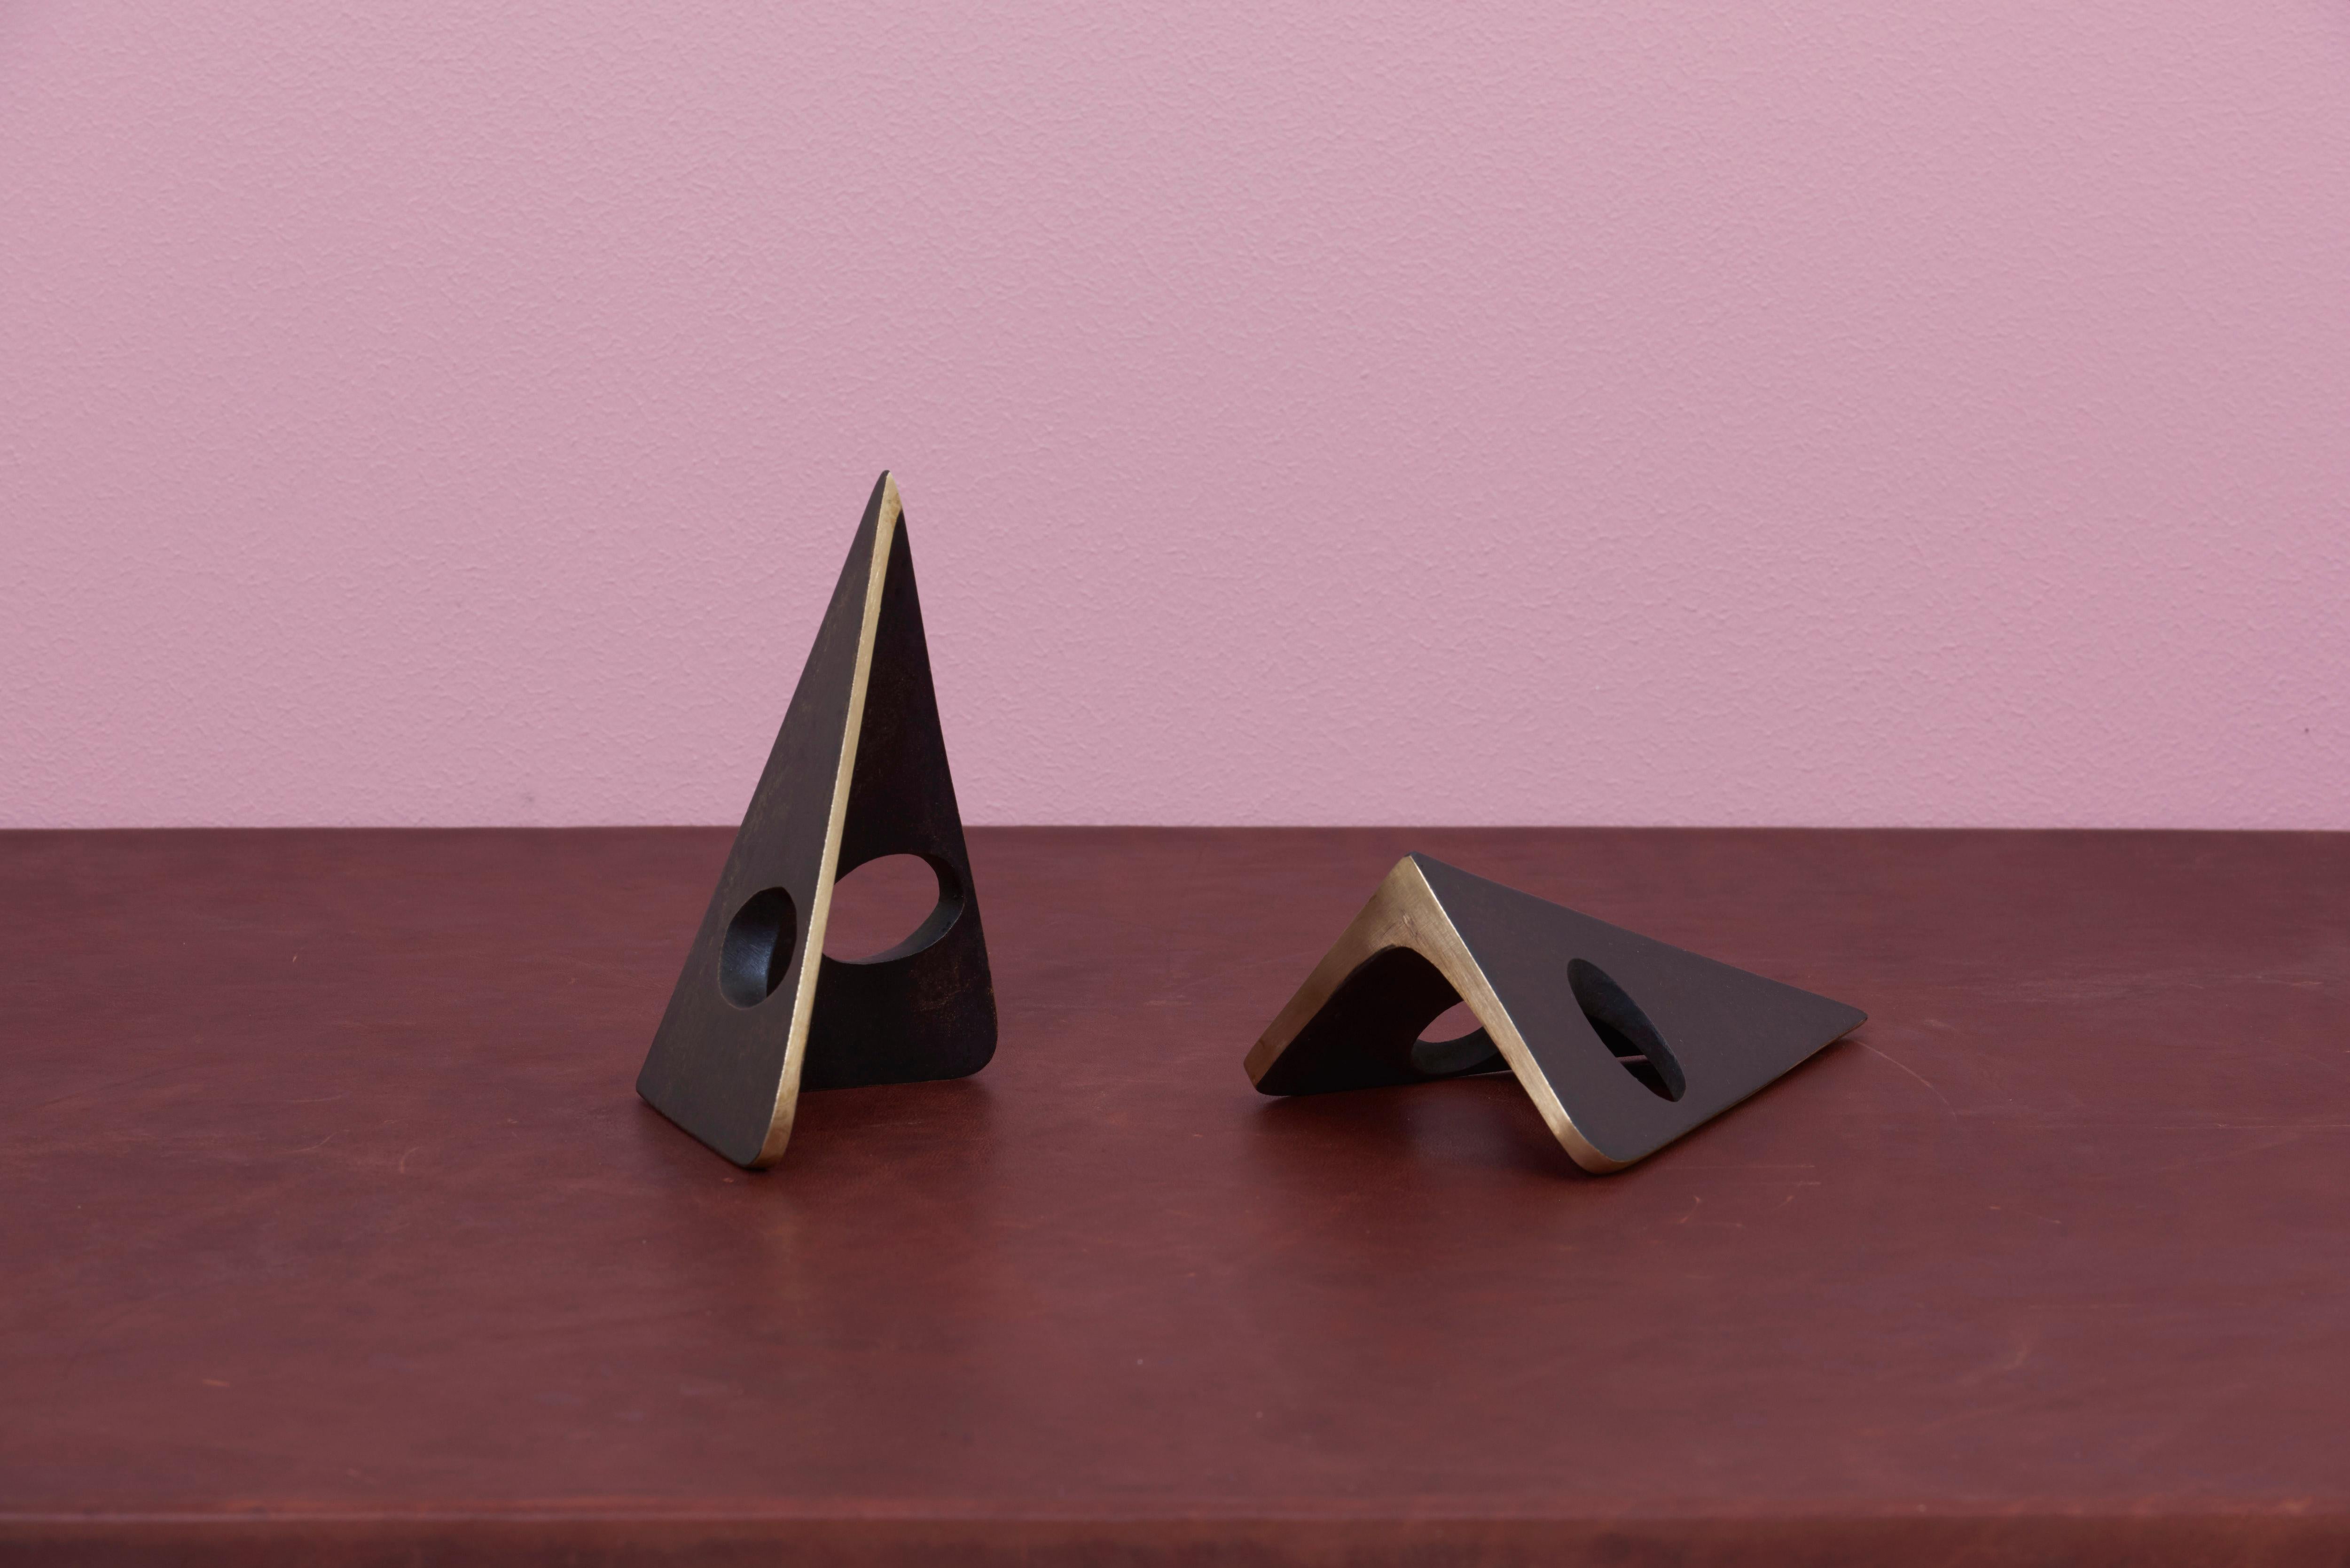 Mid-20th Century Pair of Carl Auböck Bookends #4100 in a Patina and Polish Brass Mix For Sale